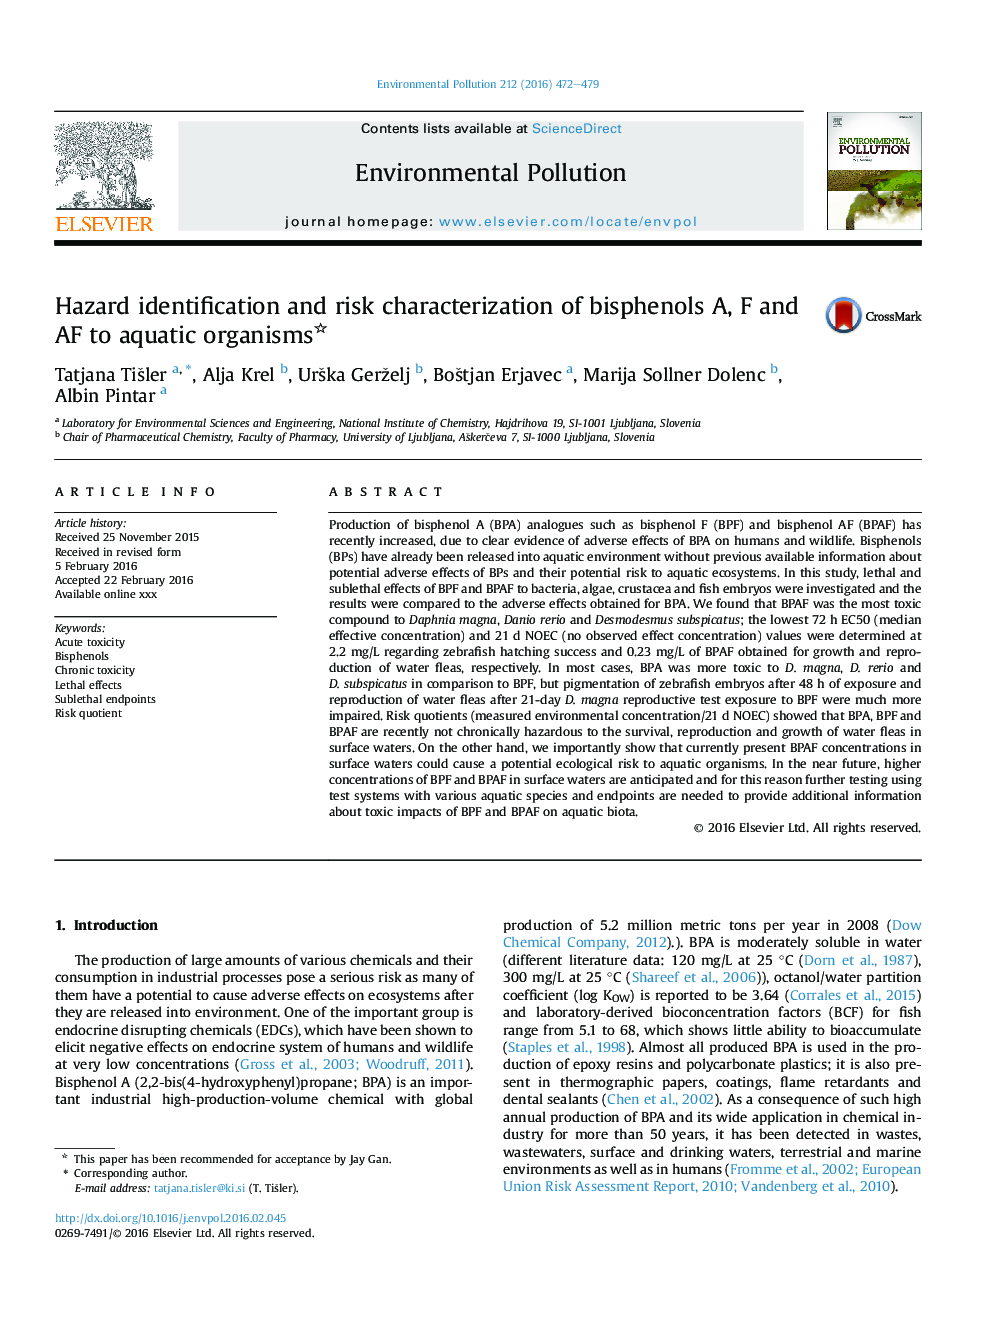 Hazard identification and risk characterization of bisphenols A, F and AF to aquatic organisms